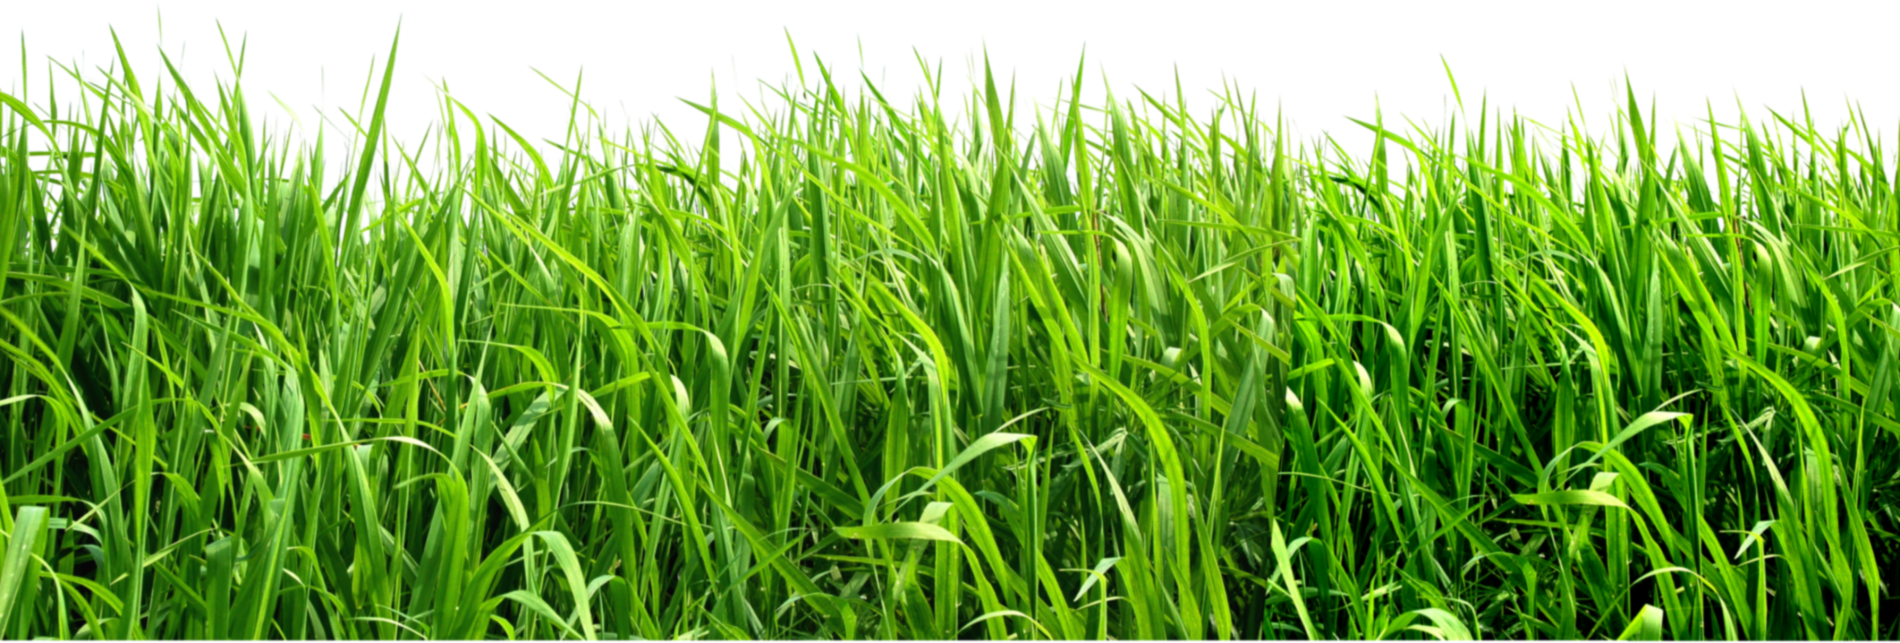 Field Grass Green Landscape Free Photo PNG Image